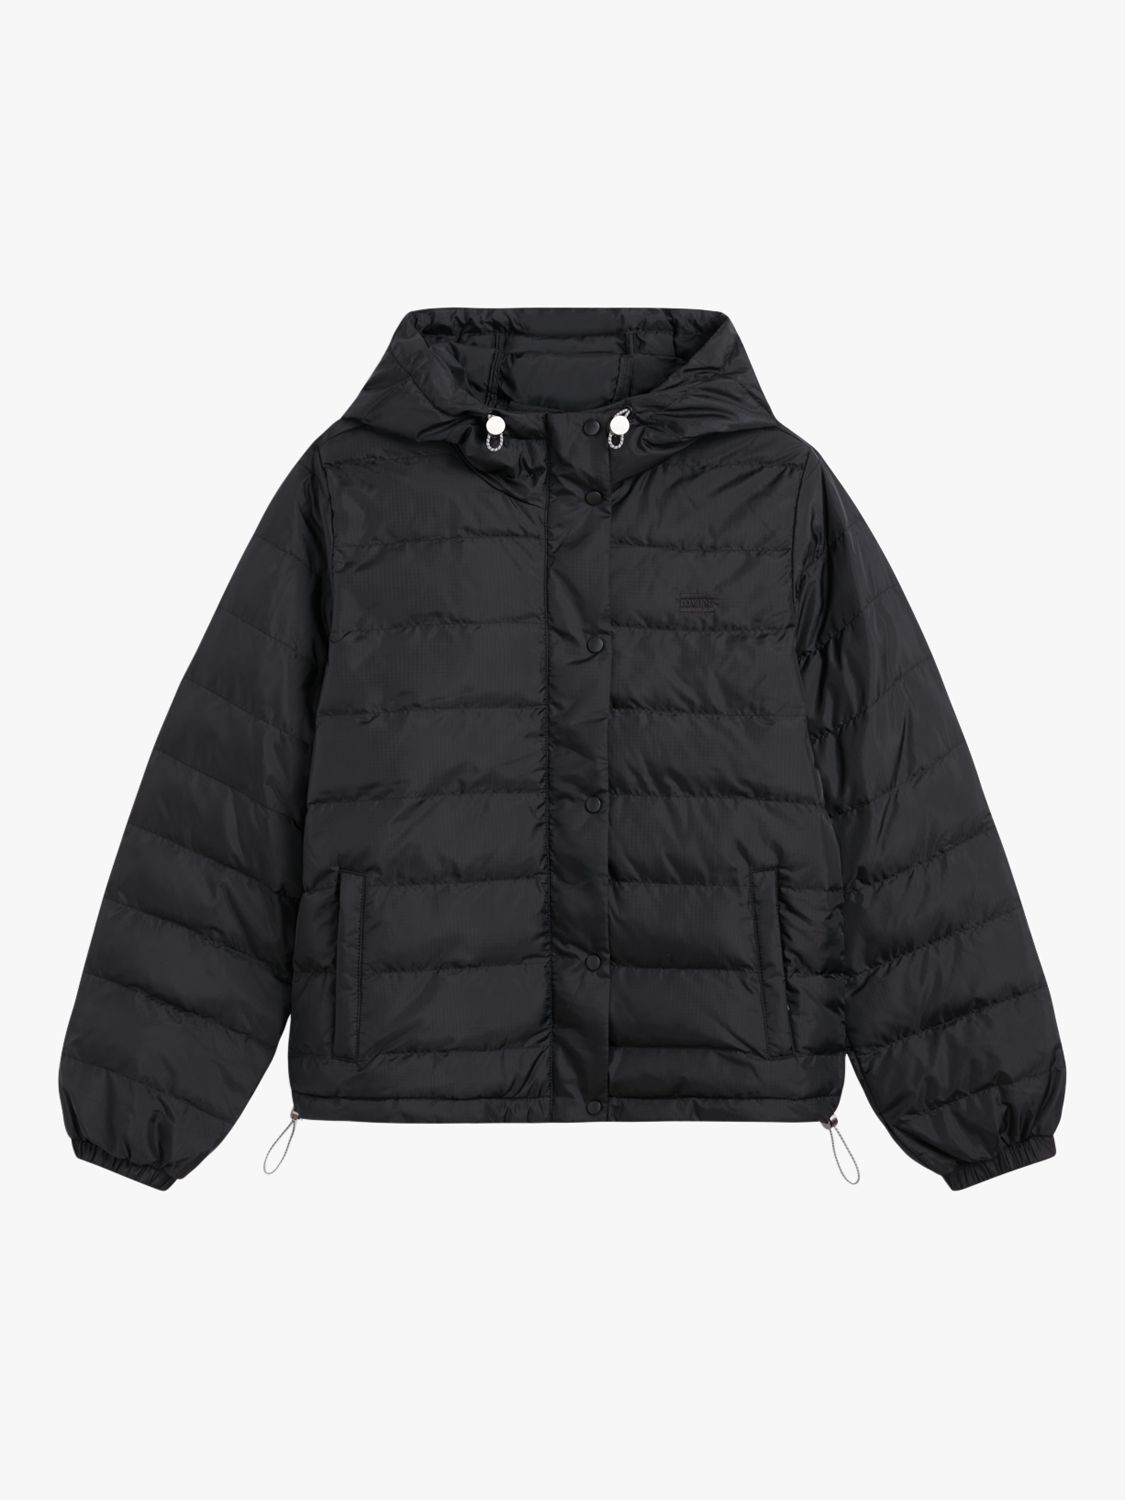 Levi's Edie Packable Quilted Jacket, Caviar at John Lewis & Partners